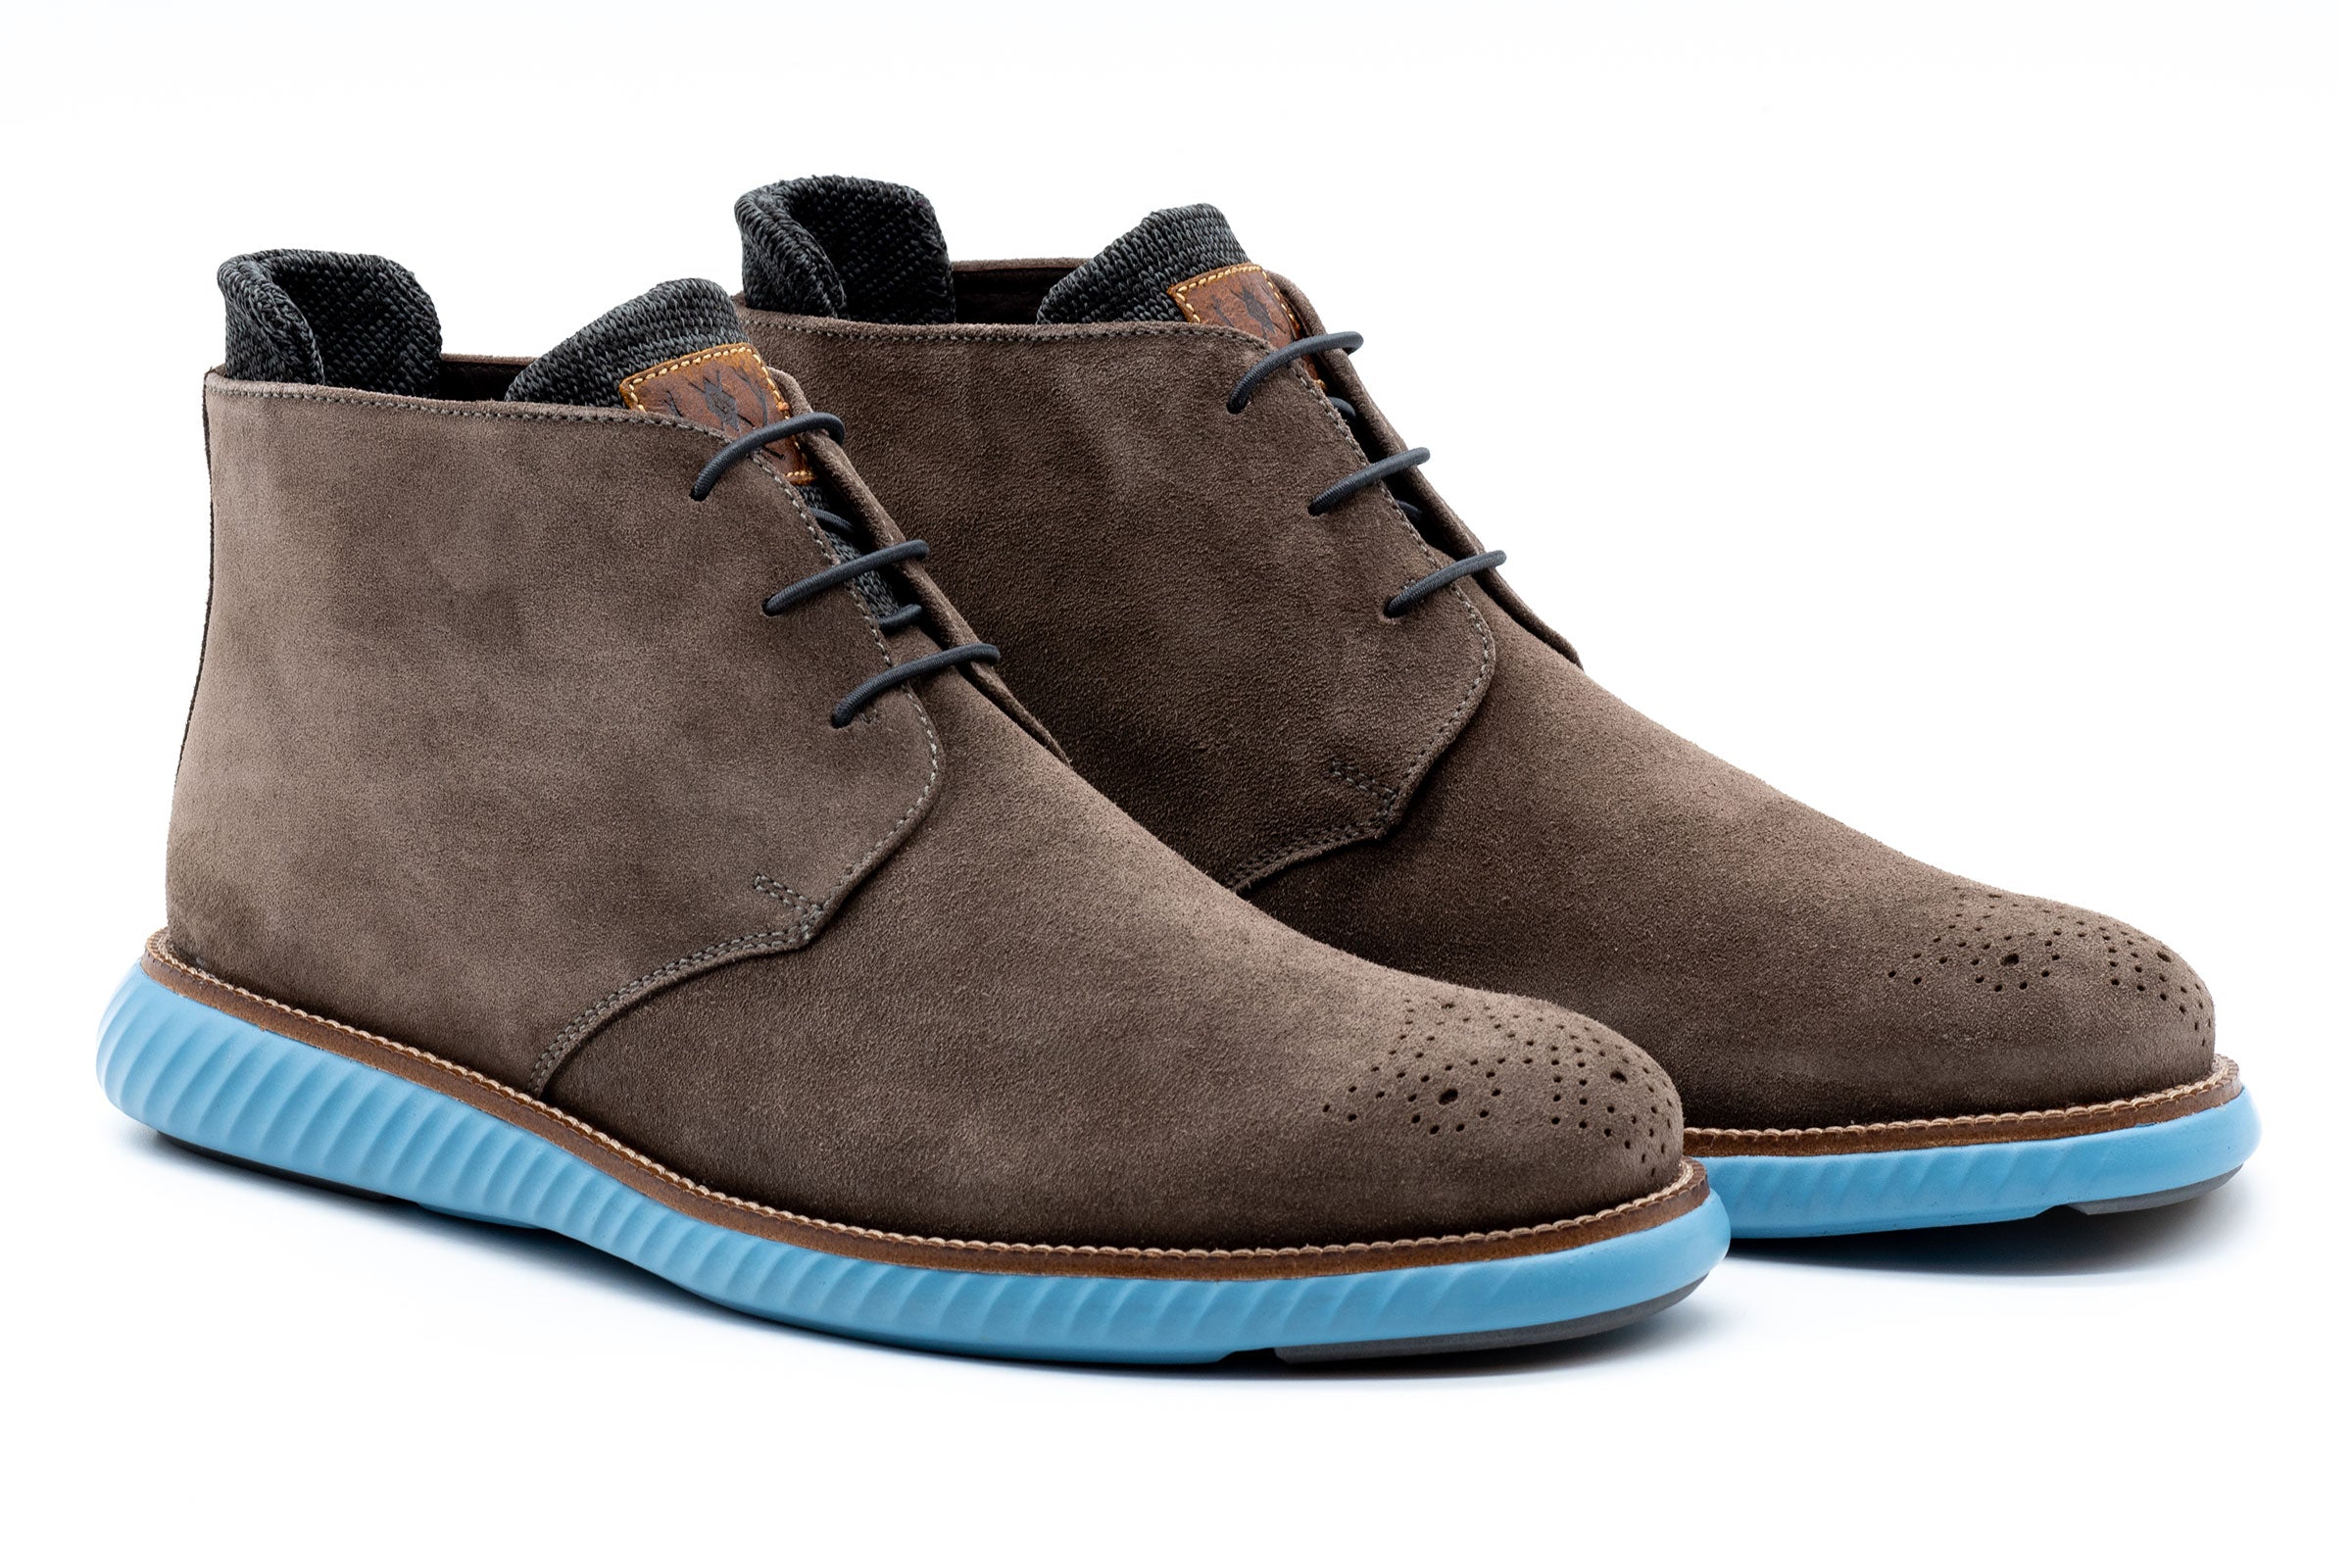 Countryaire Water Repellent Suede Leather Chukka Boots - Smoke